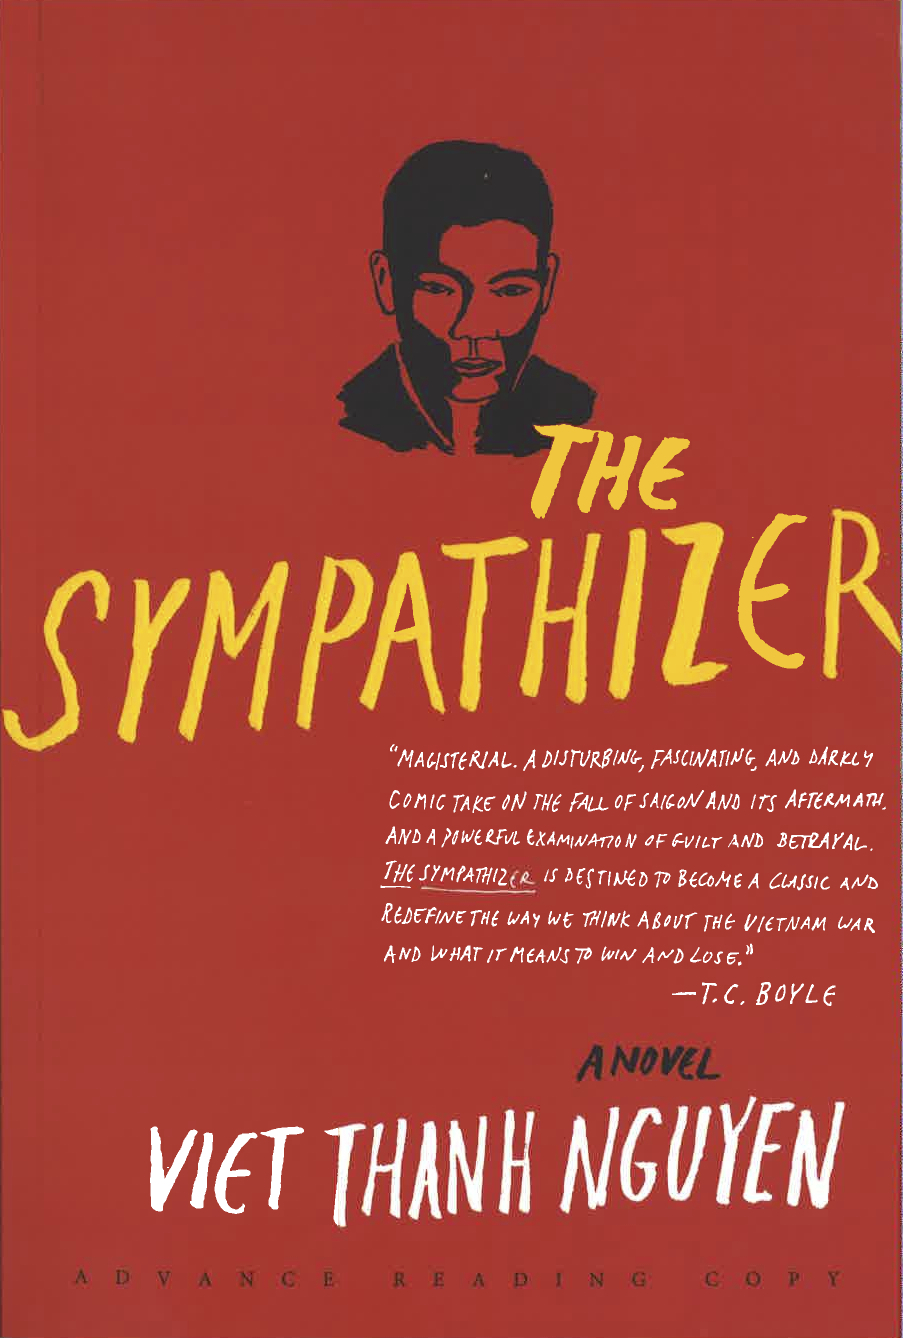 The Sympathizer cover